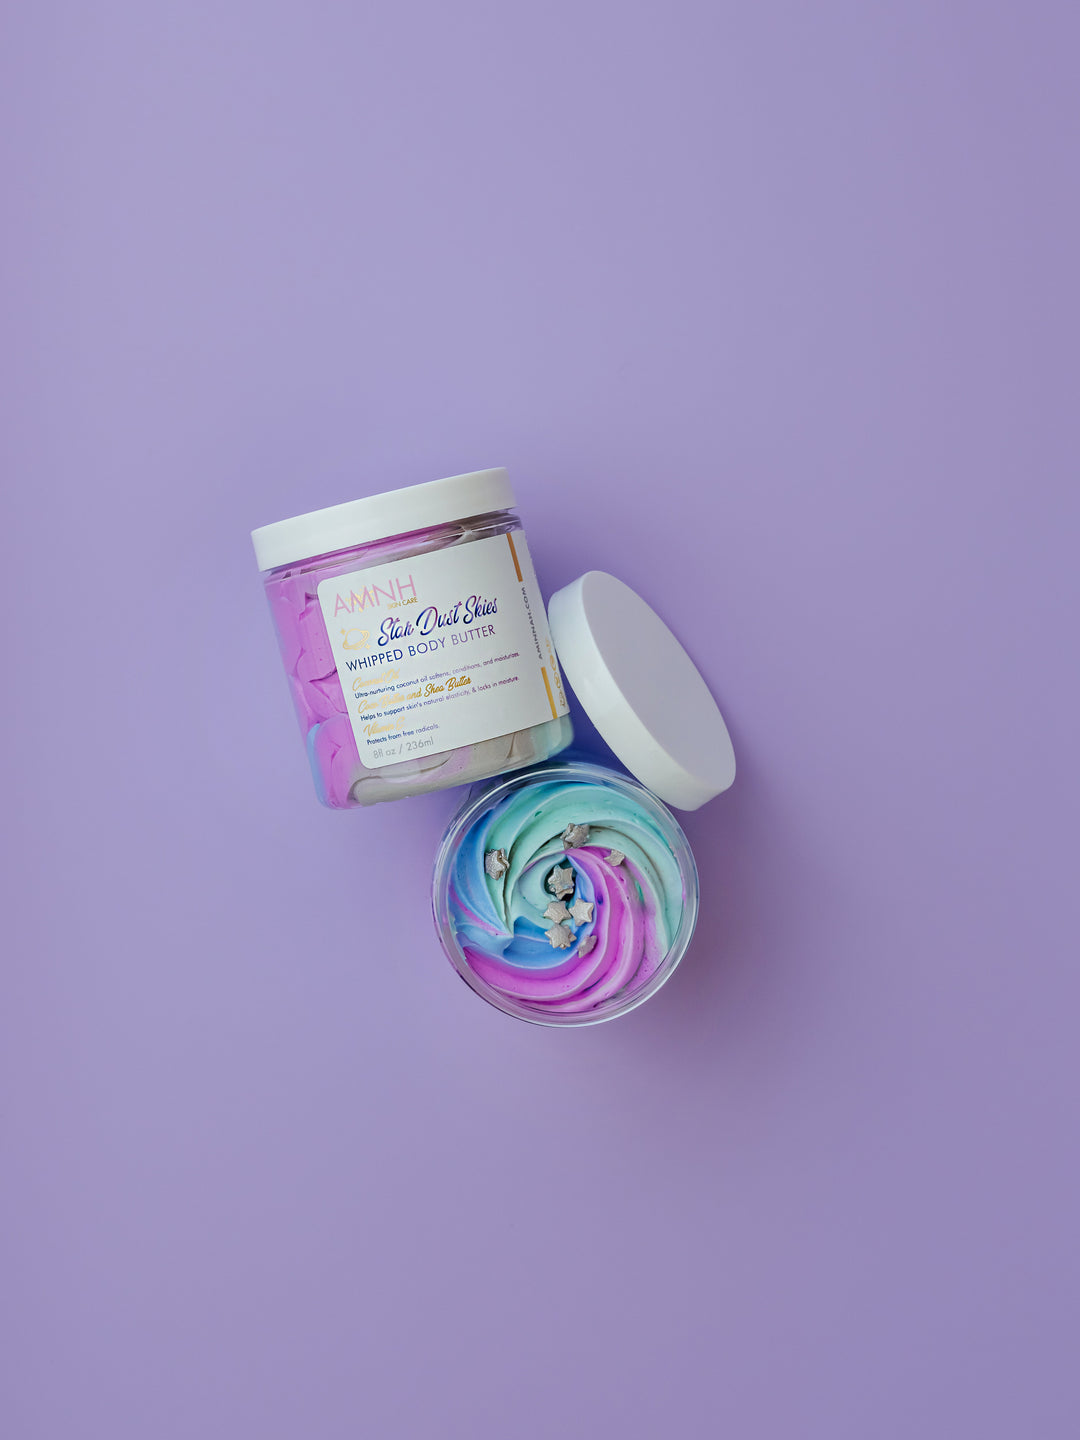 "Star Dust Skies" Whipped Body Butter